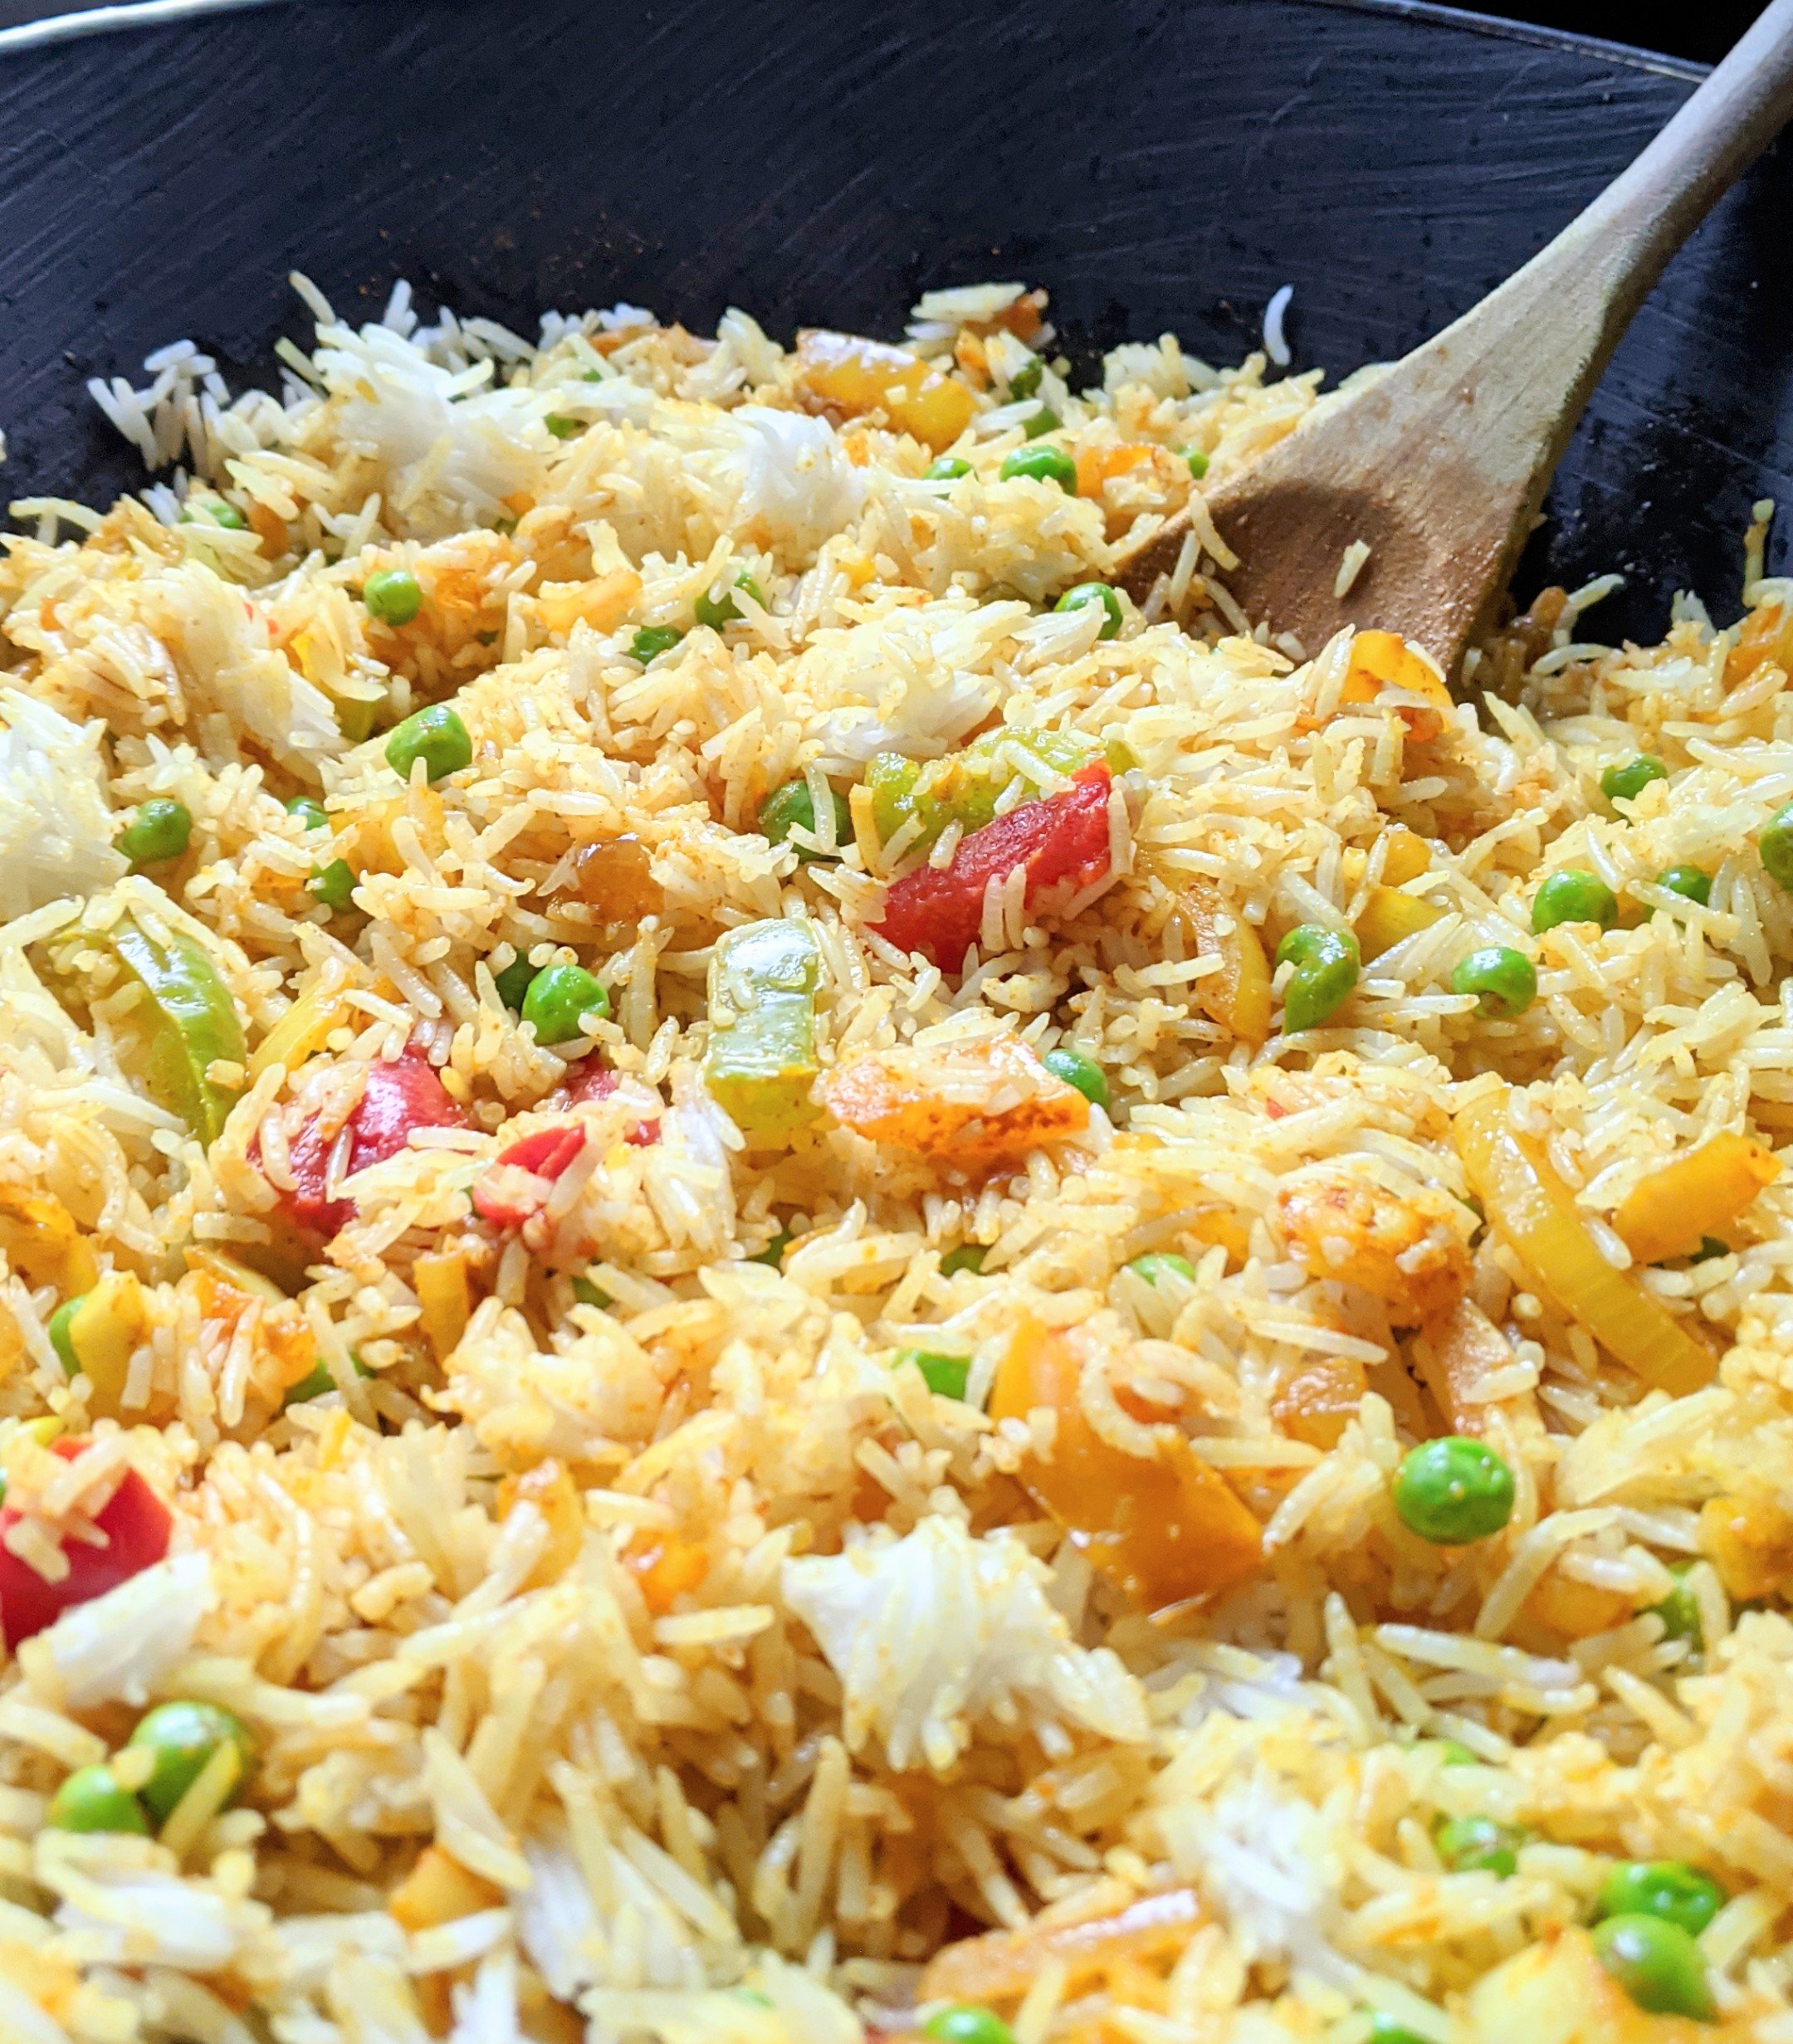 leftover rice recipes with lemon and turmeric rice in a wok fried rice with greek asian middle eastern and indian influences melting pot golden rice recipe gluten free vegan vegetarian